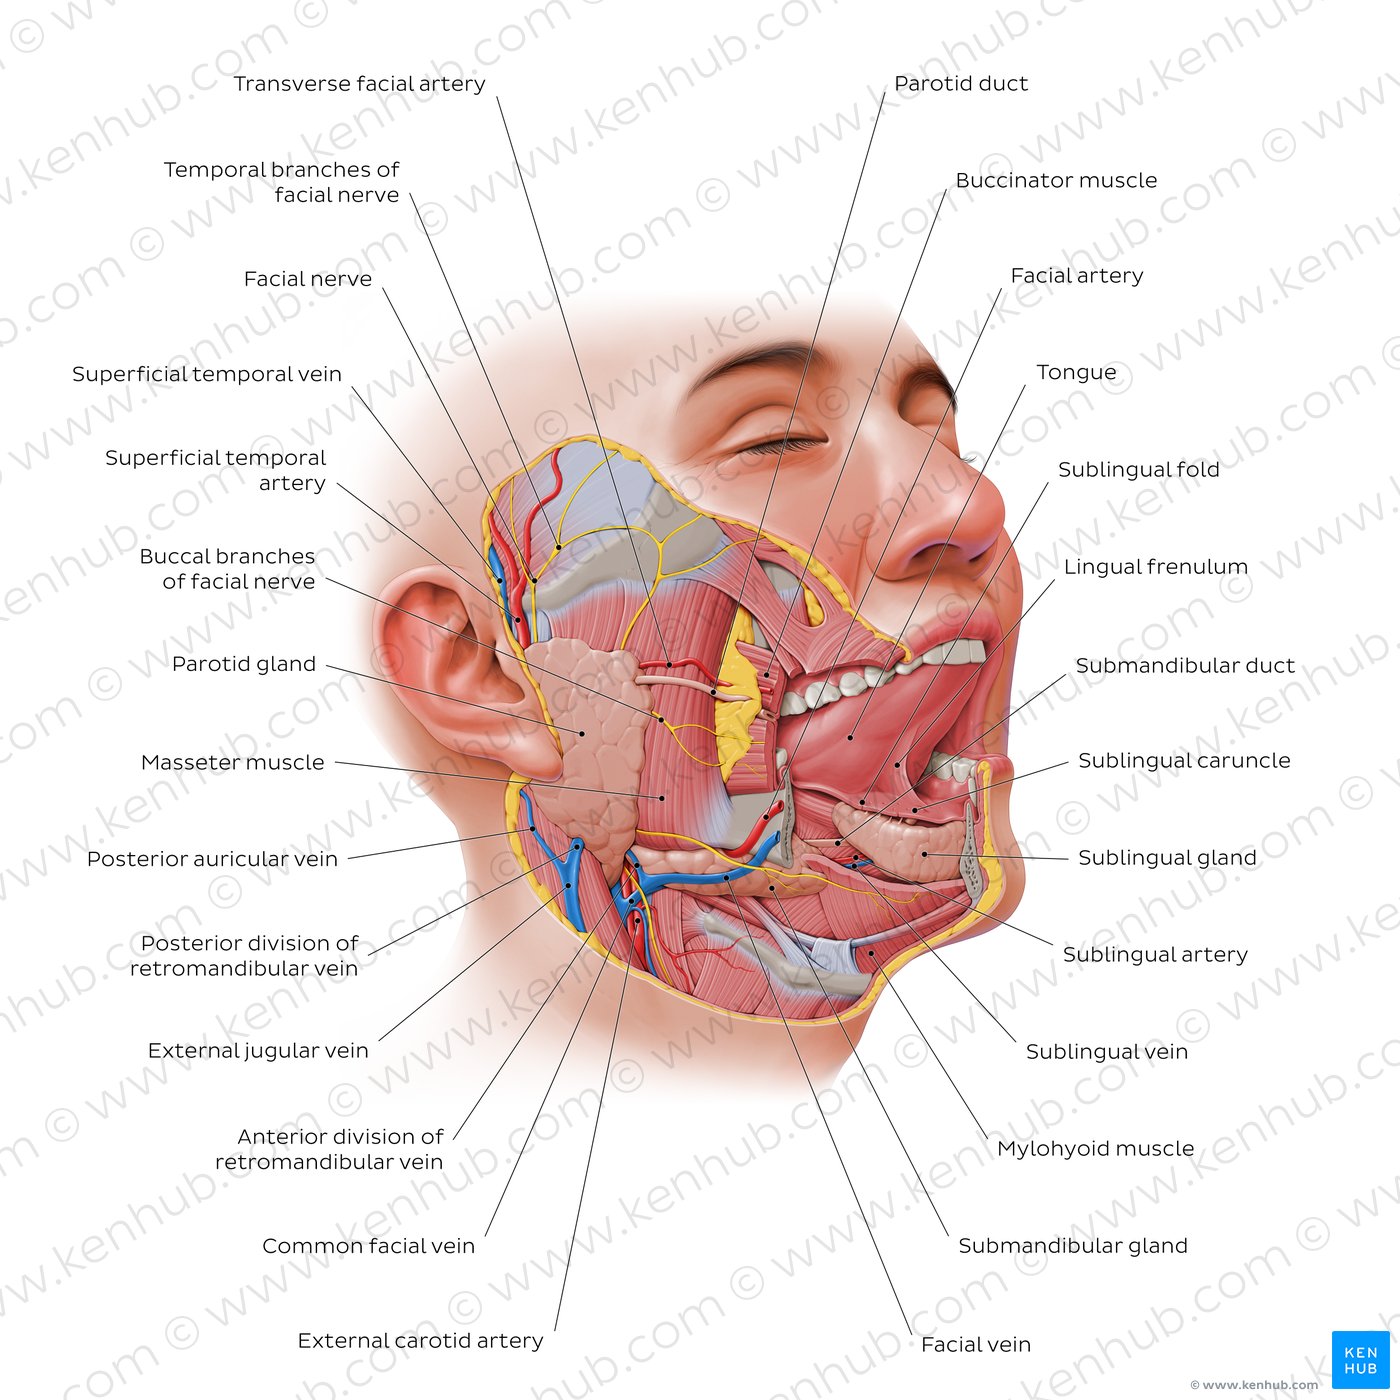 Overview of the salivary glands (lateral-right view)